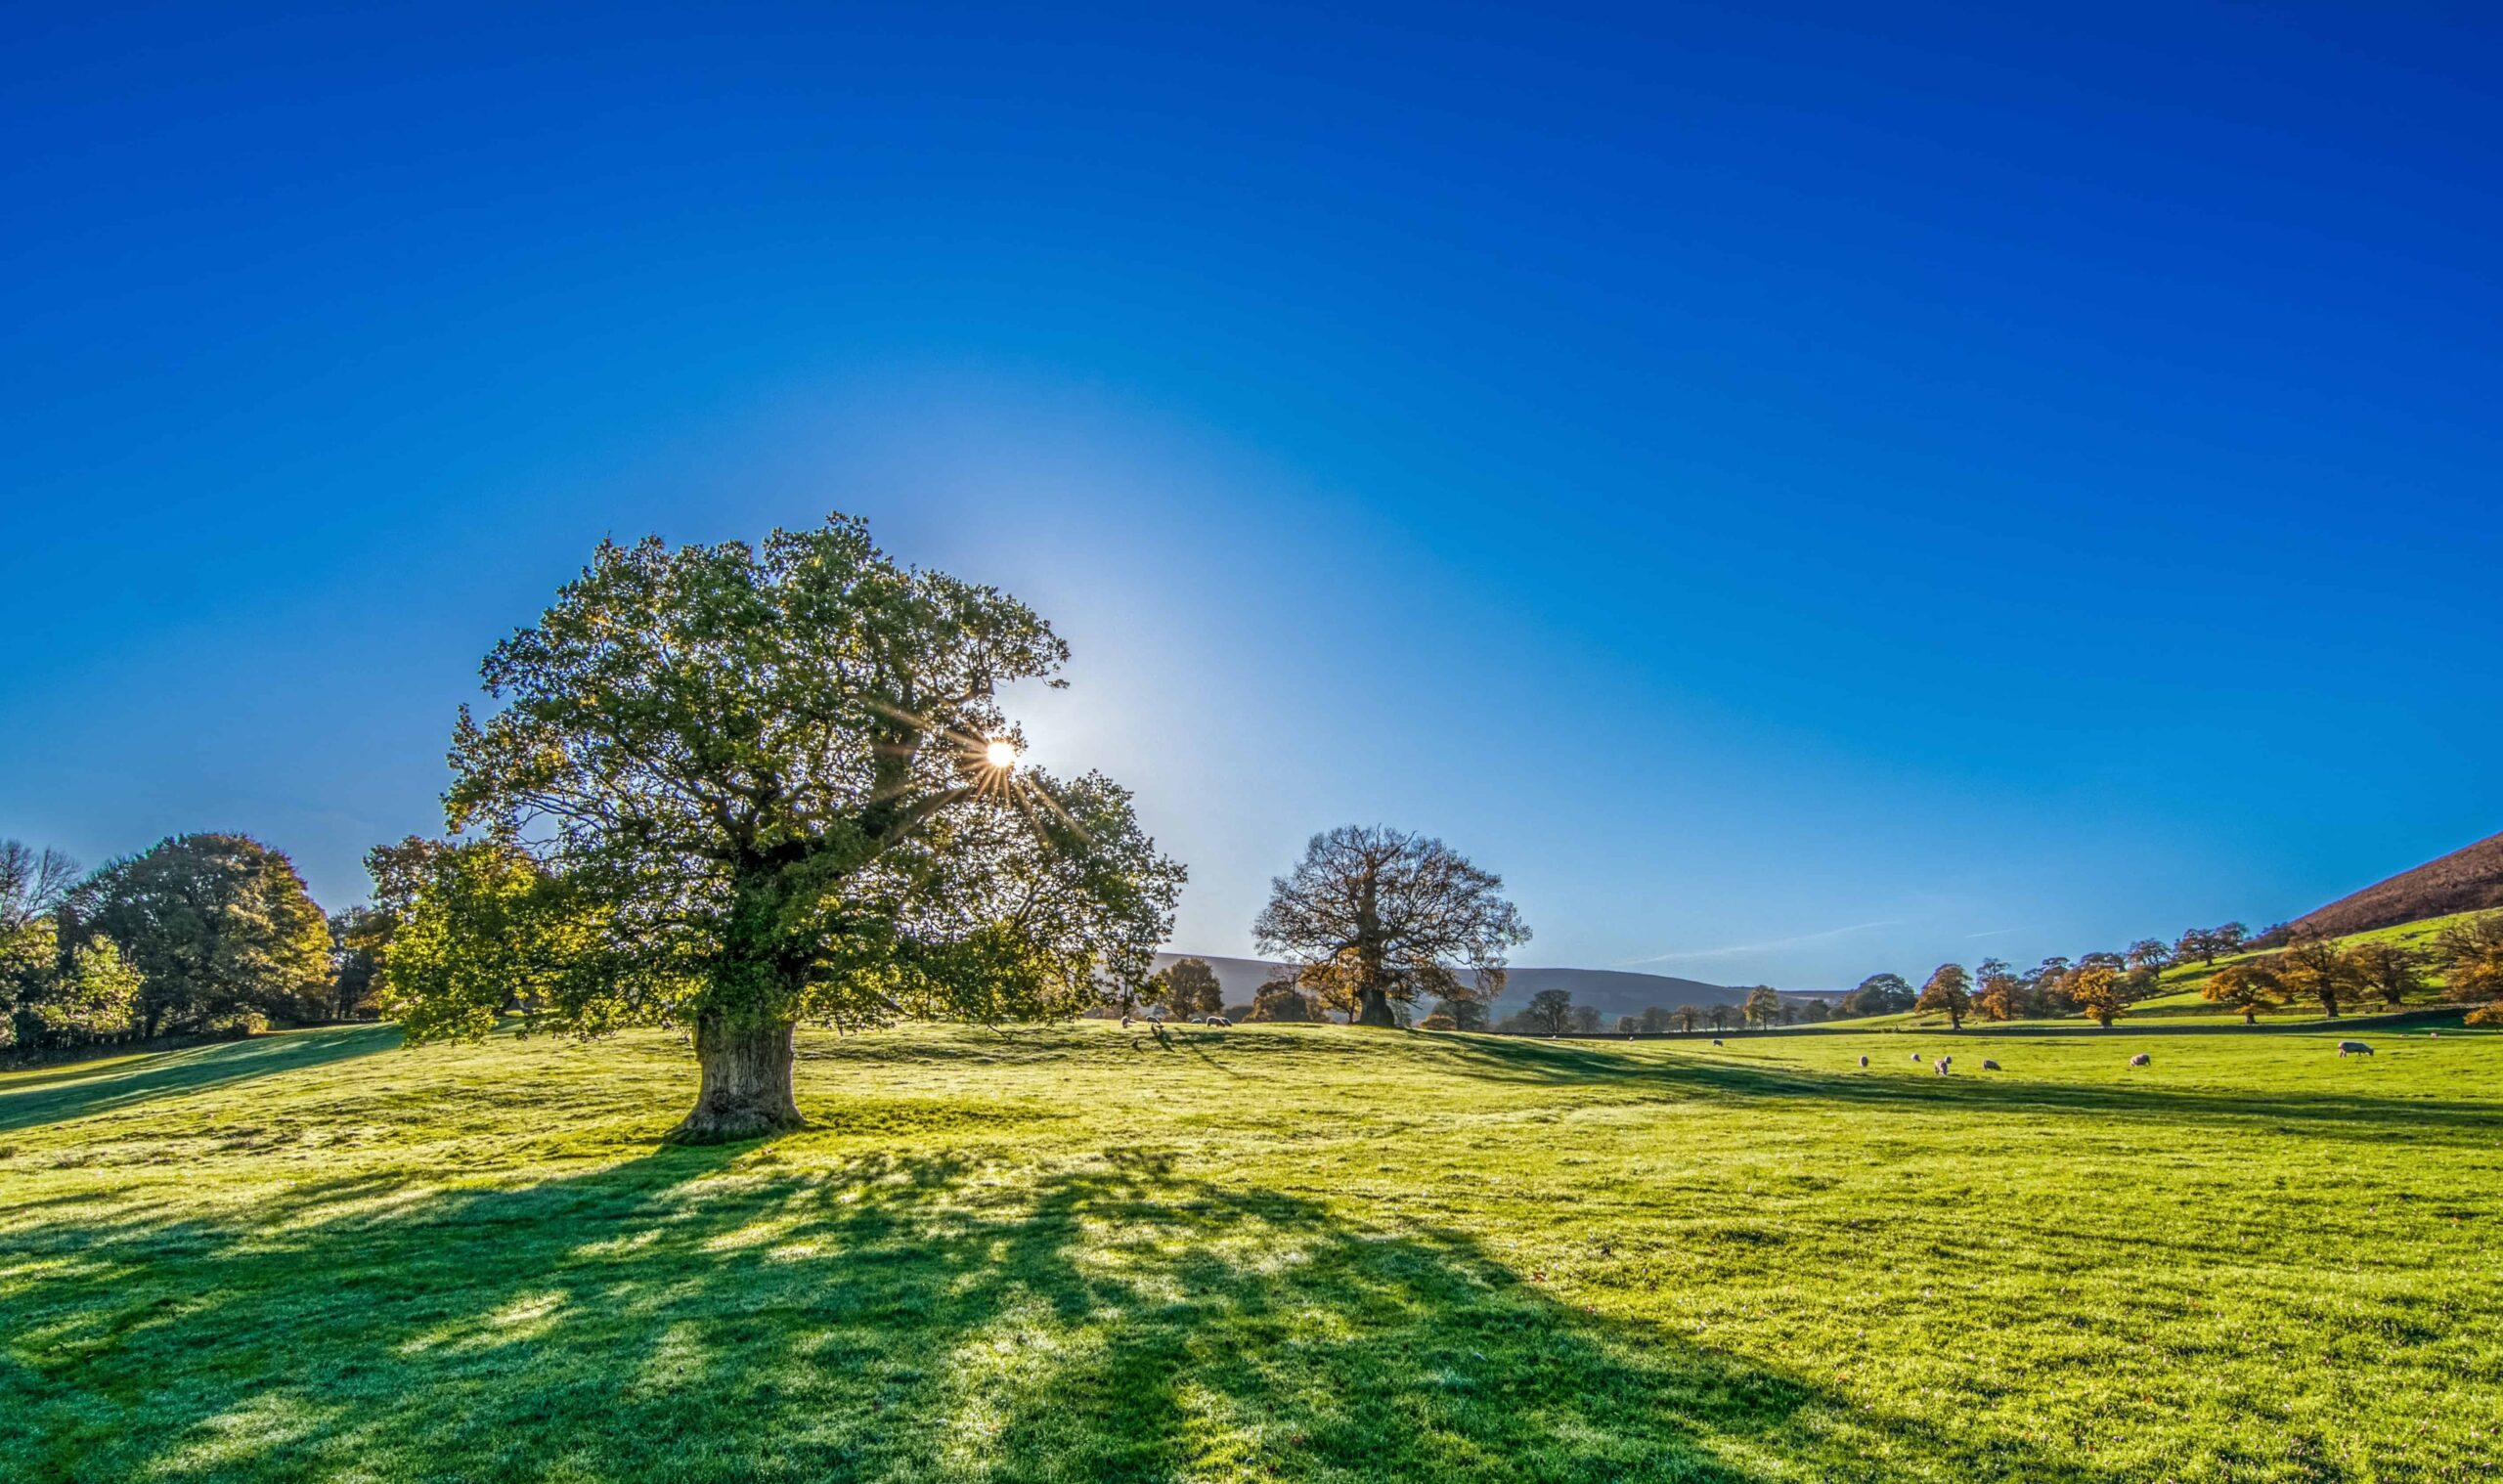 Free picture: blue sky, tree, countryside, summer, hill, grass